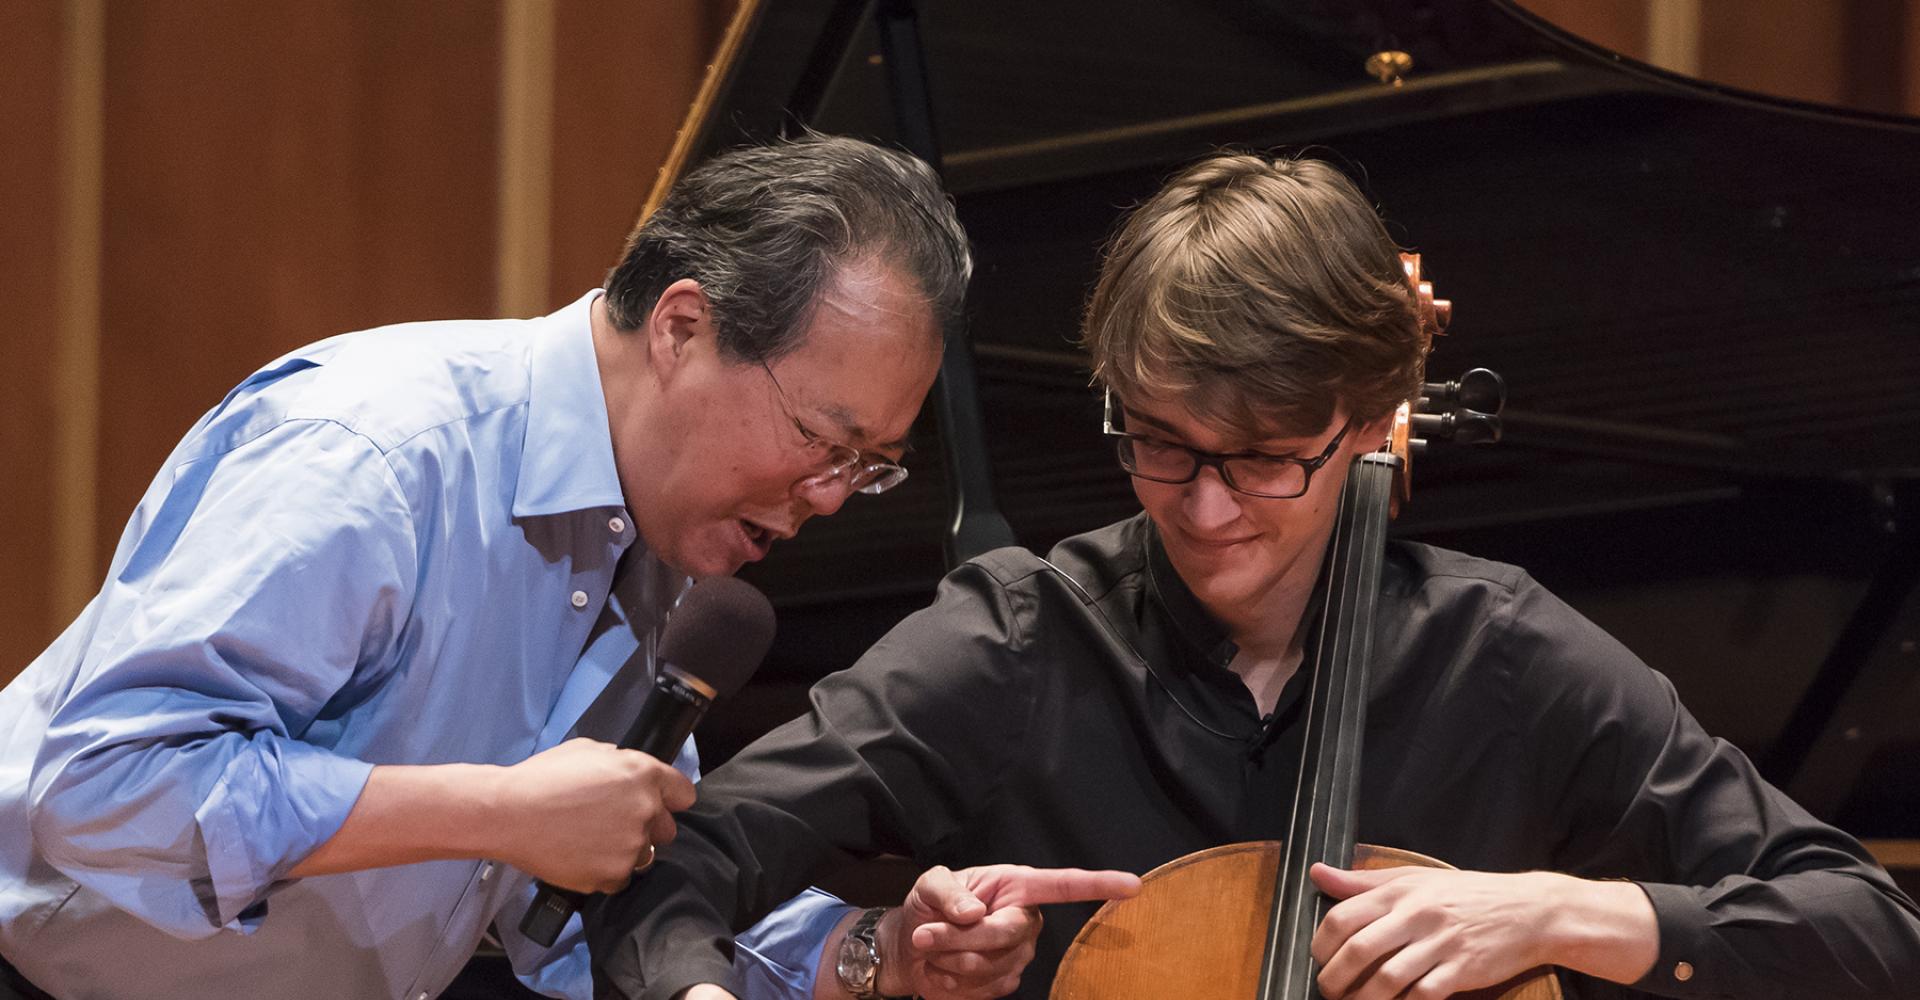 Yo-Yo Ma works with a student cellist during a masterclass